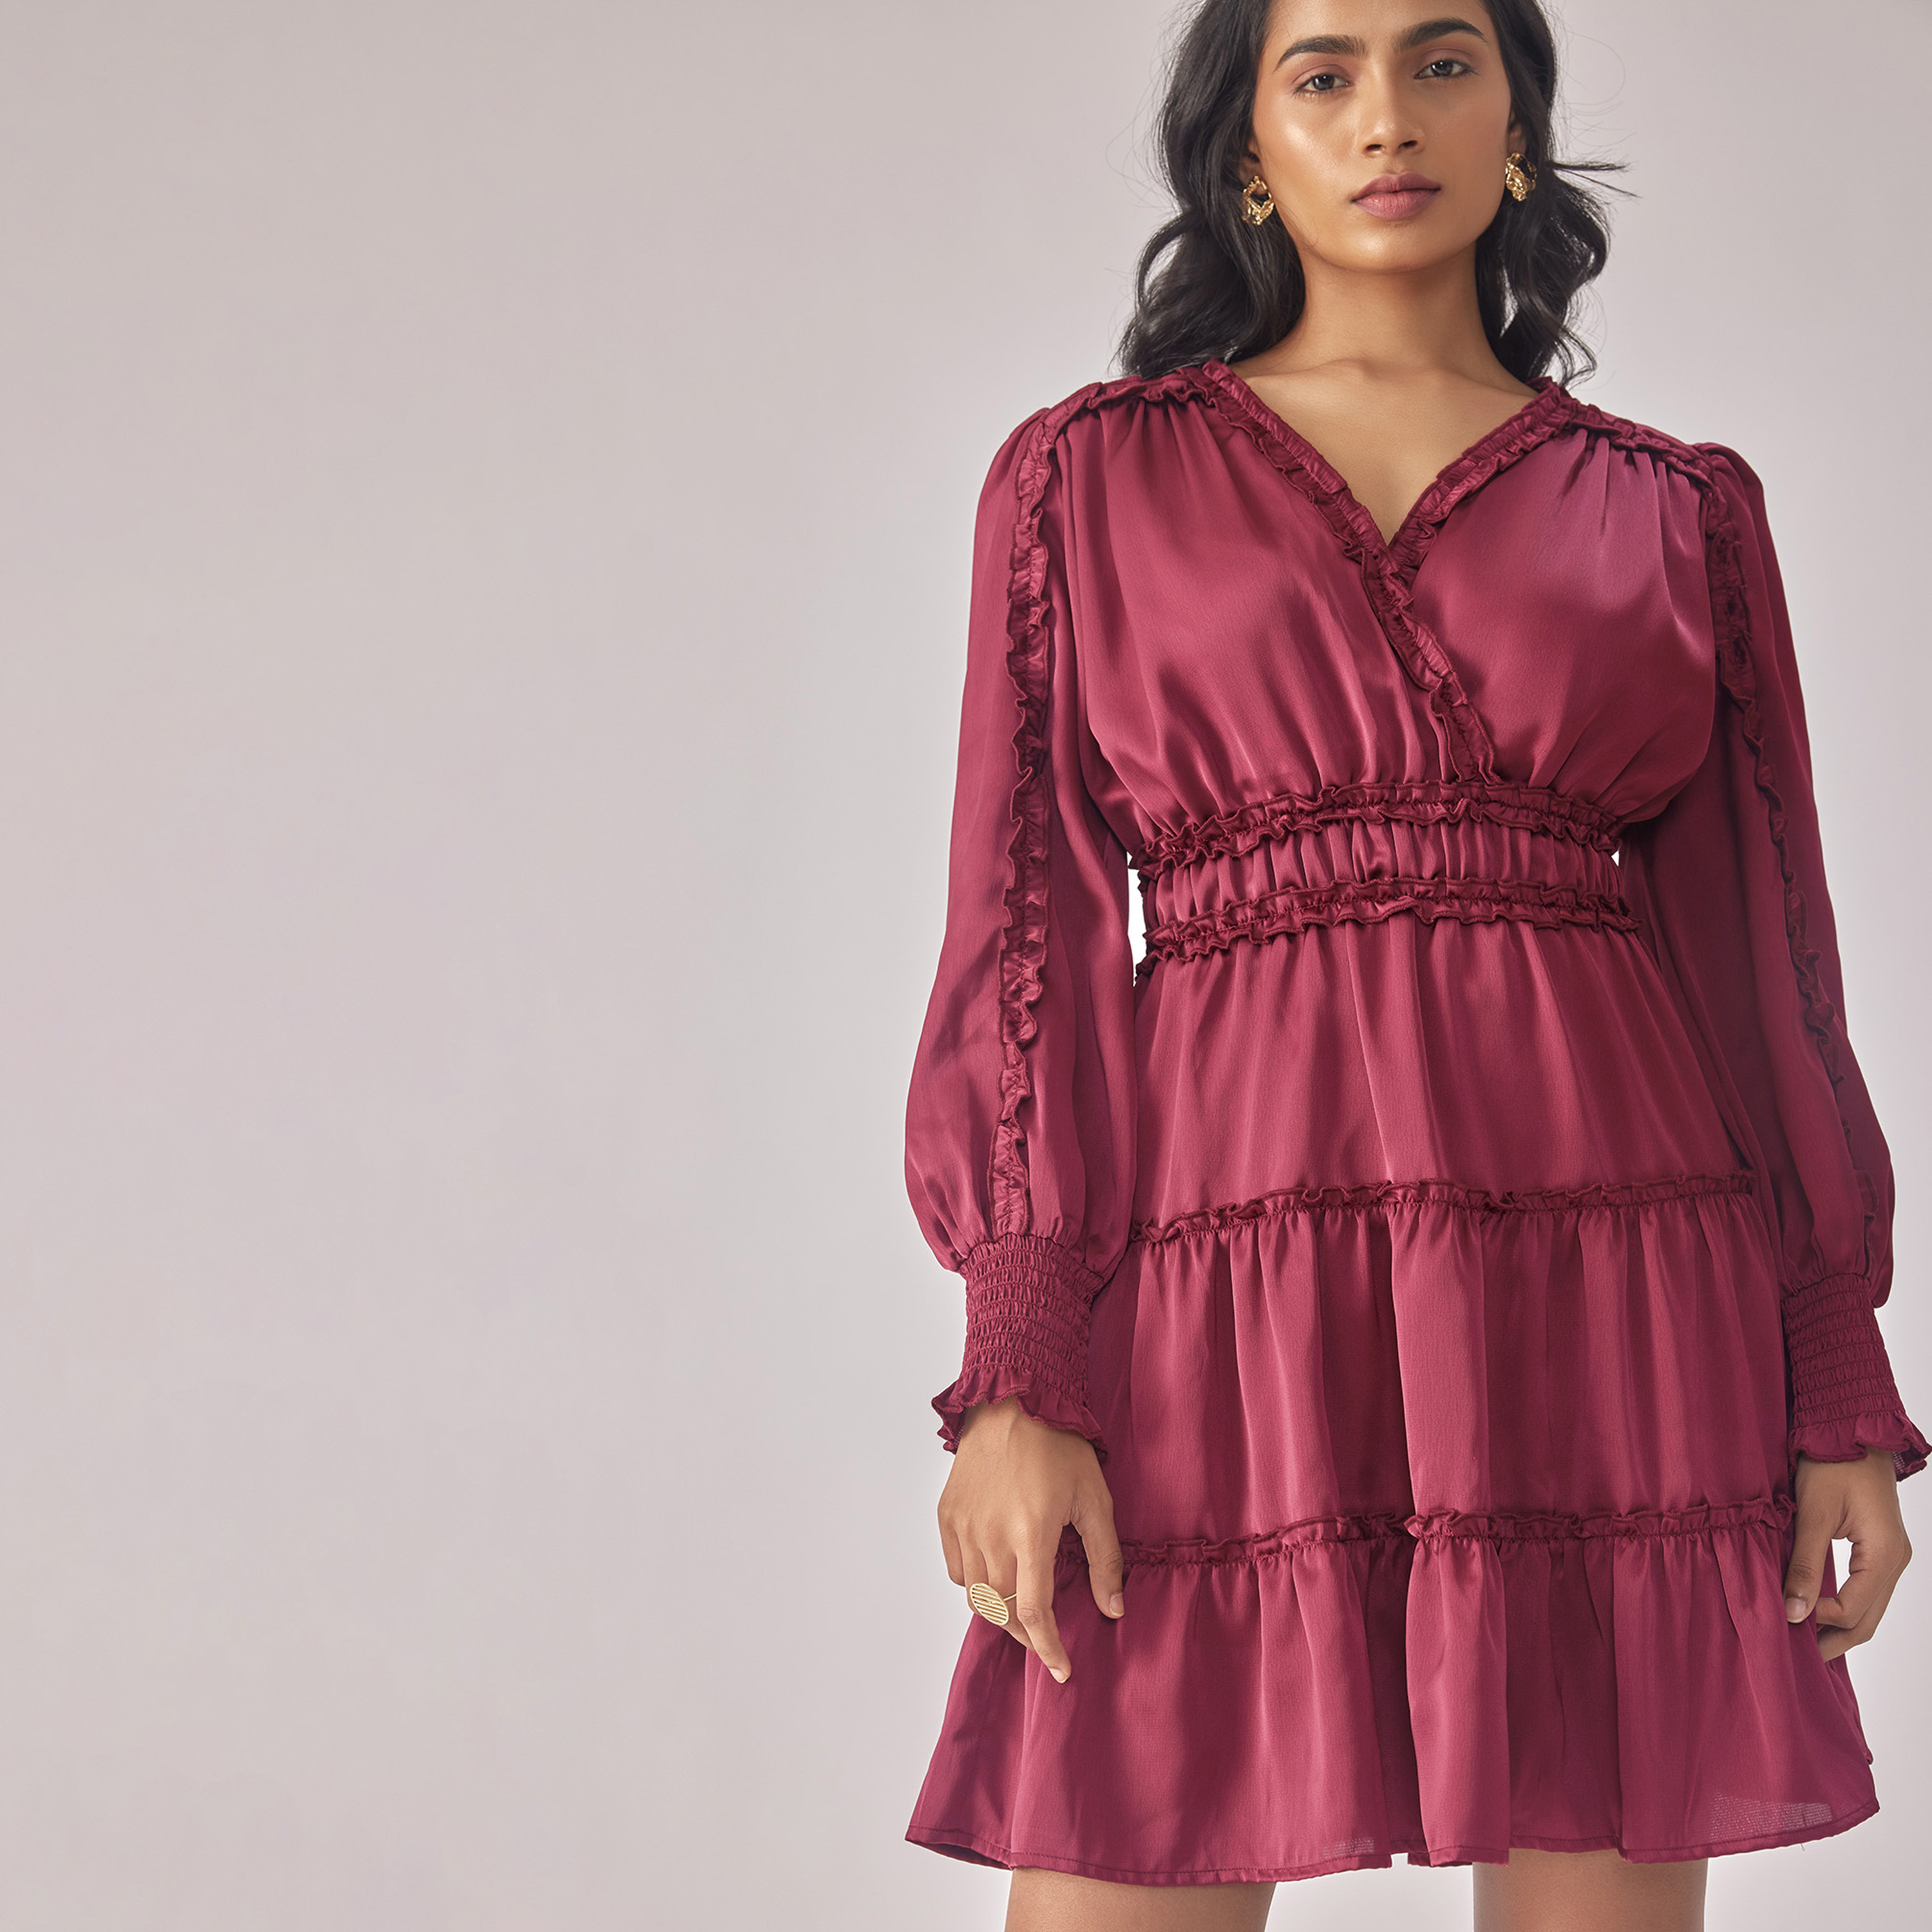 Best party dresses: 40 party dresses for women to buy in 2023